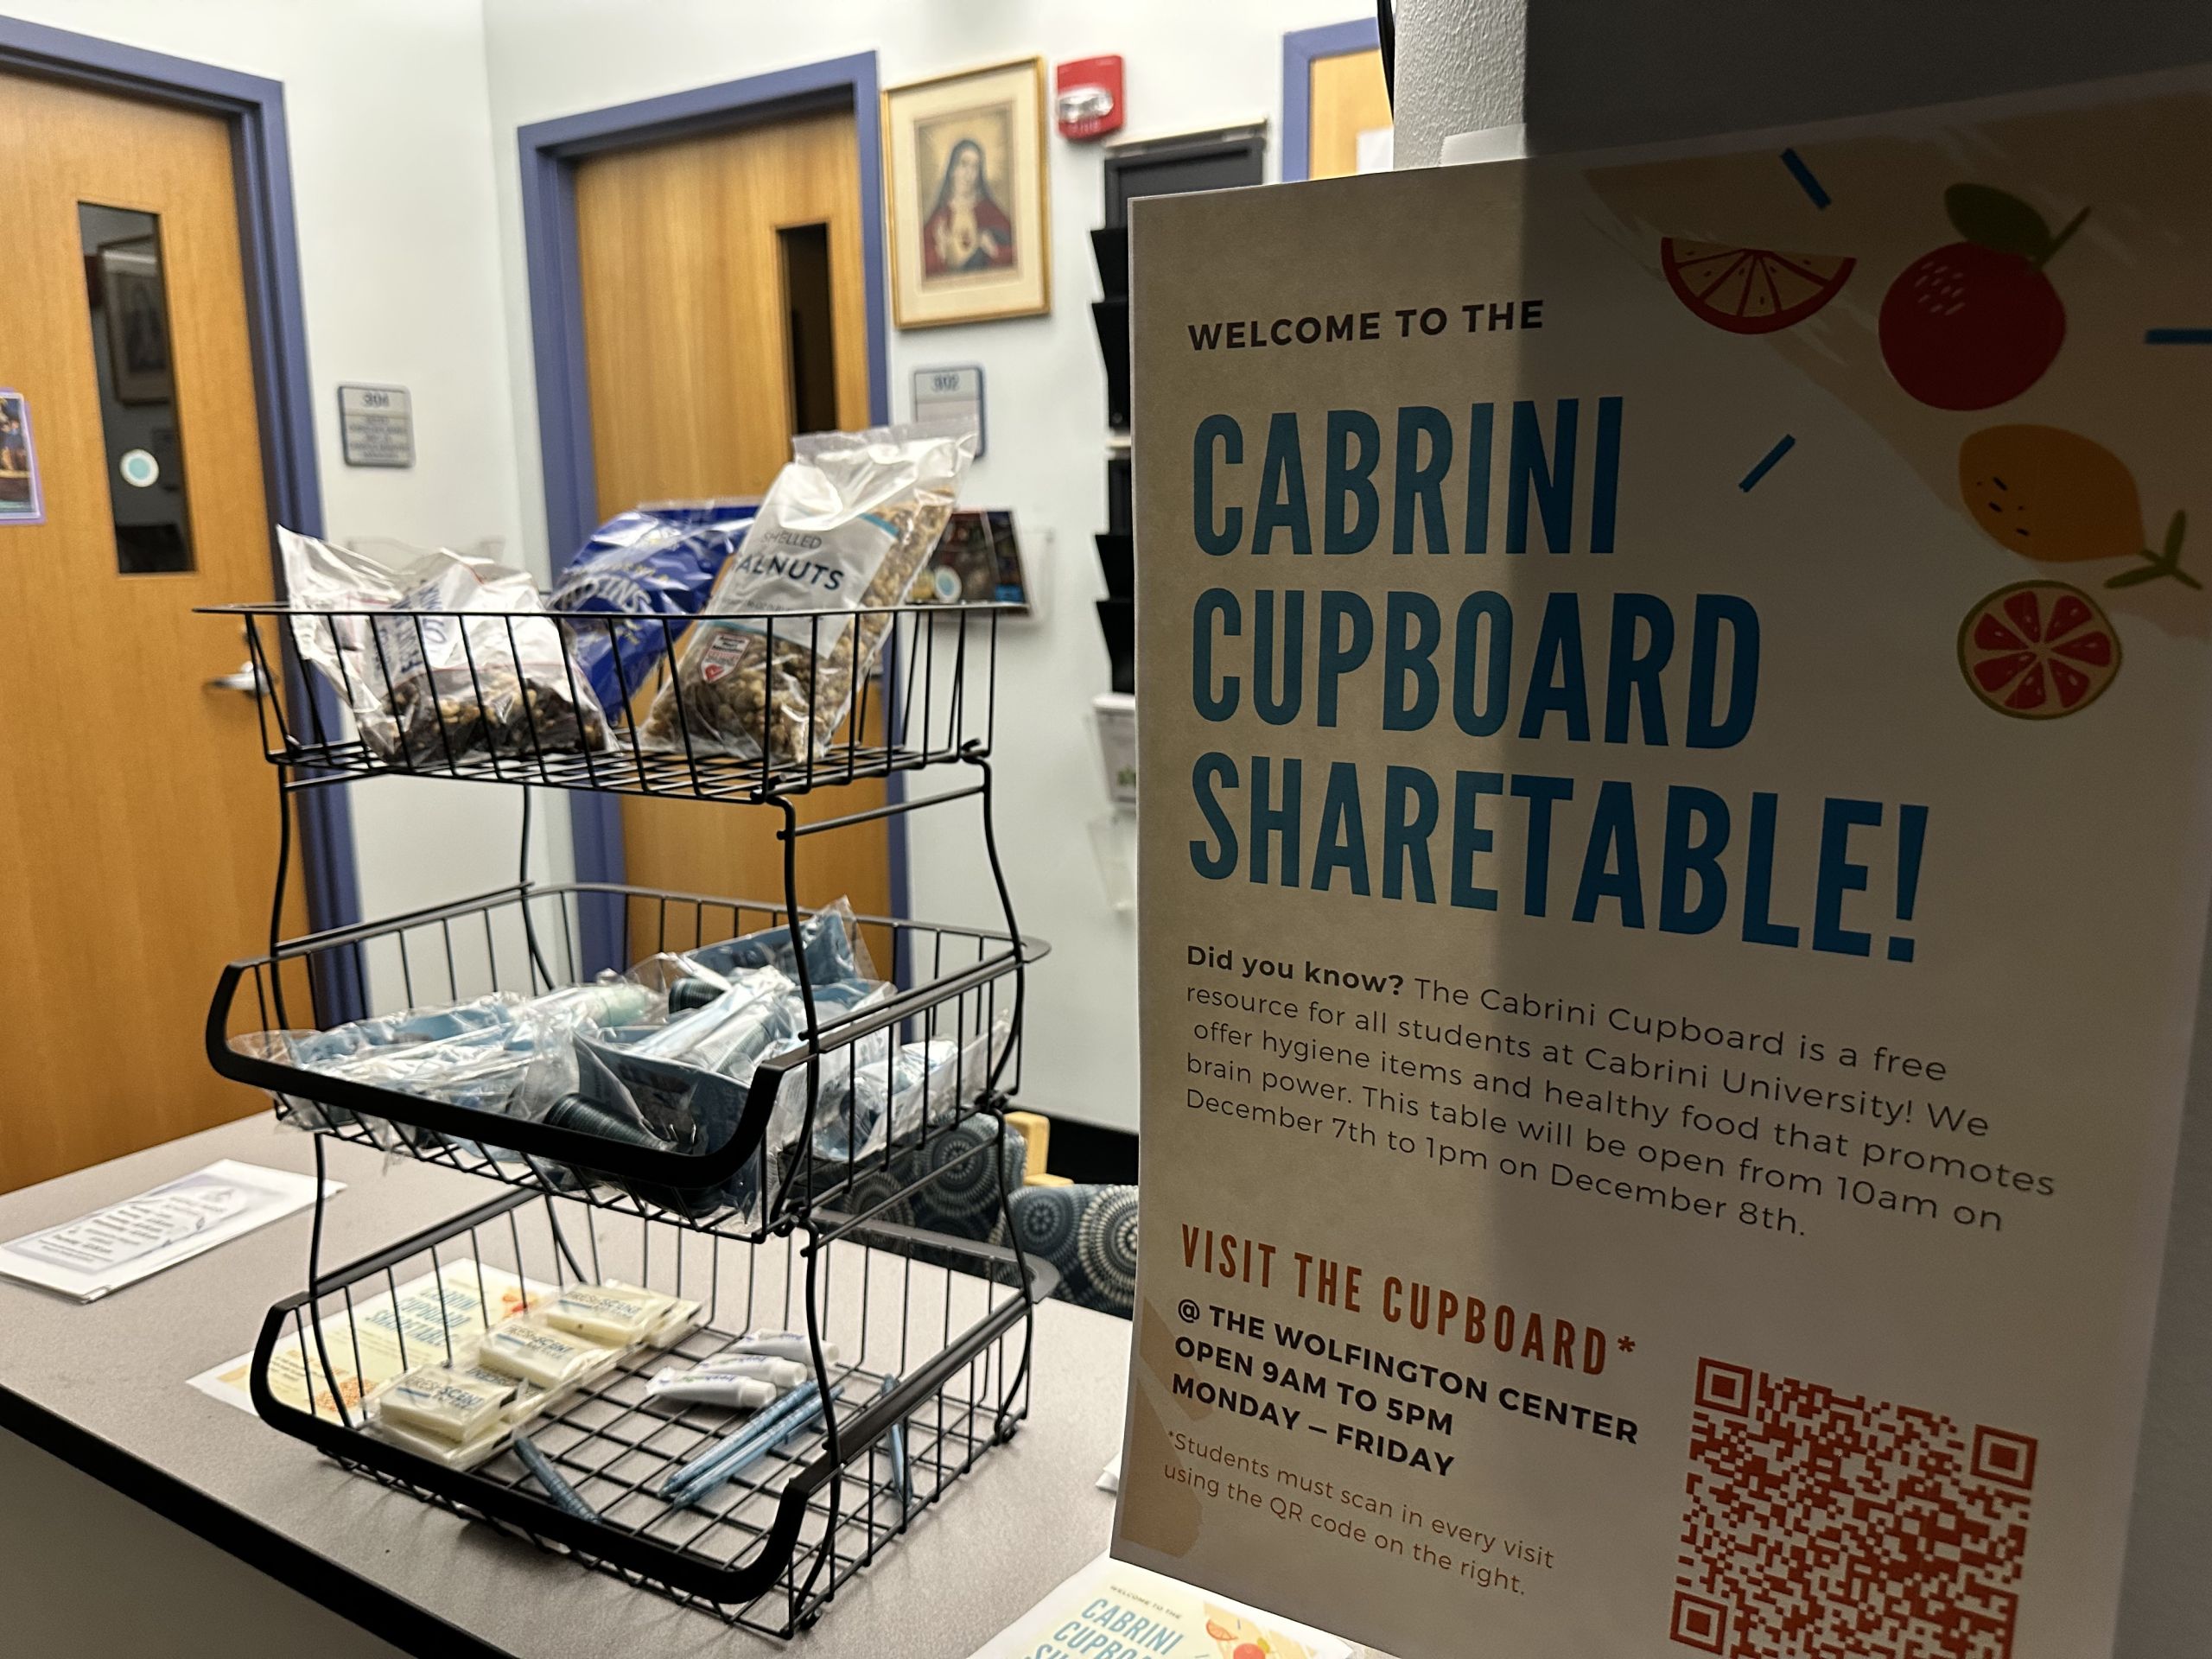 A share table is available for students to have easy access to items from the Cupboard. Photo by Iris Redondo.